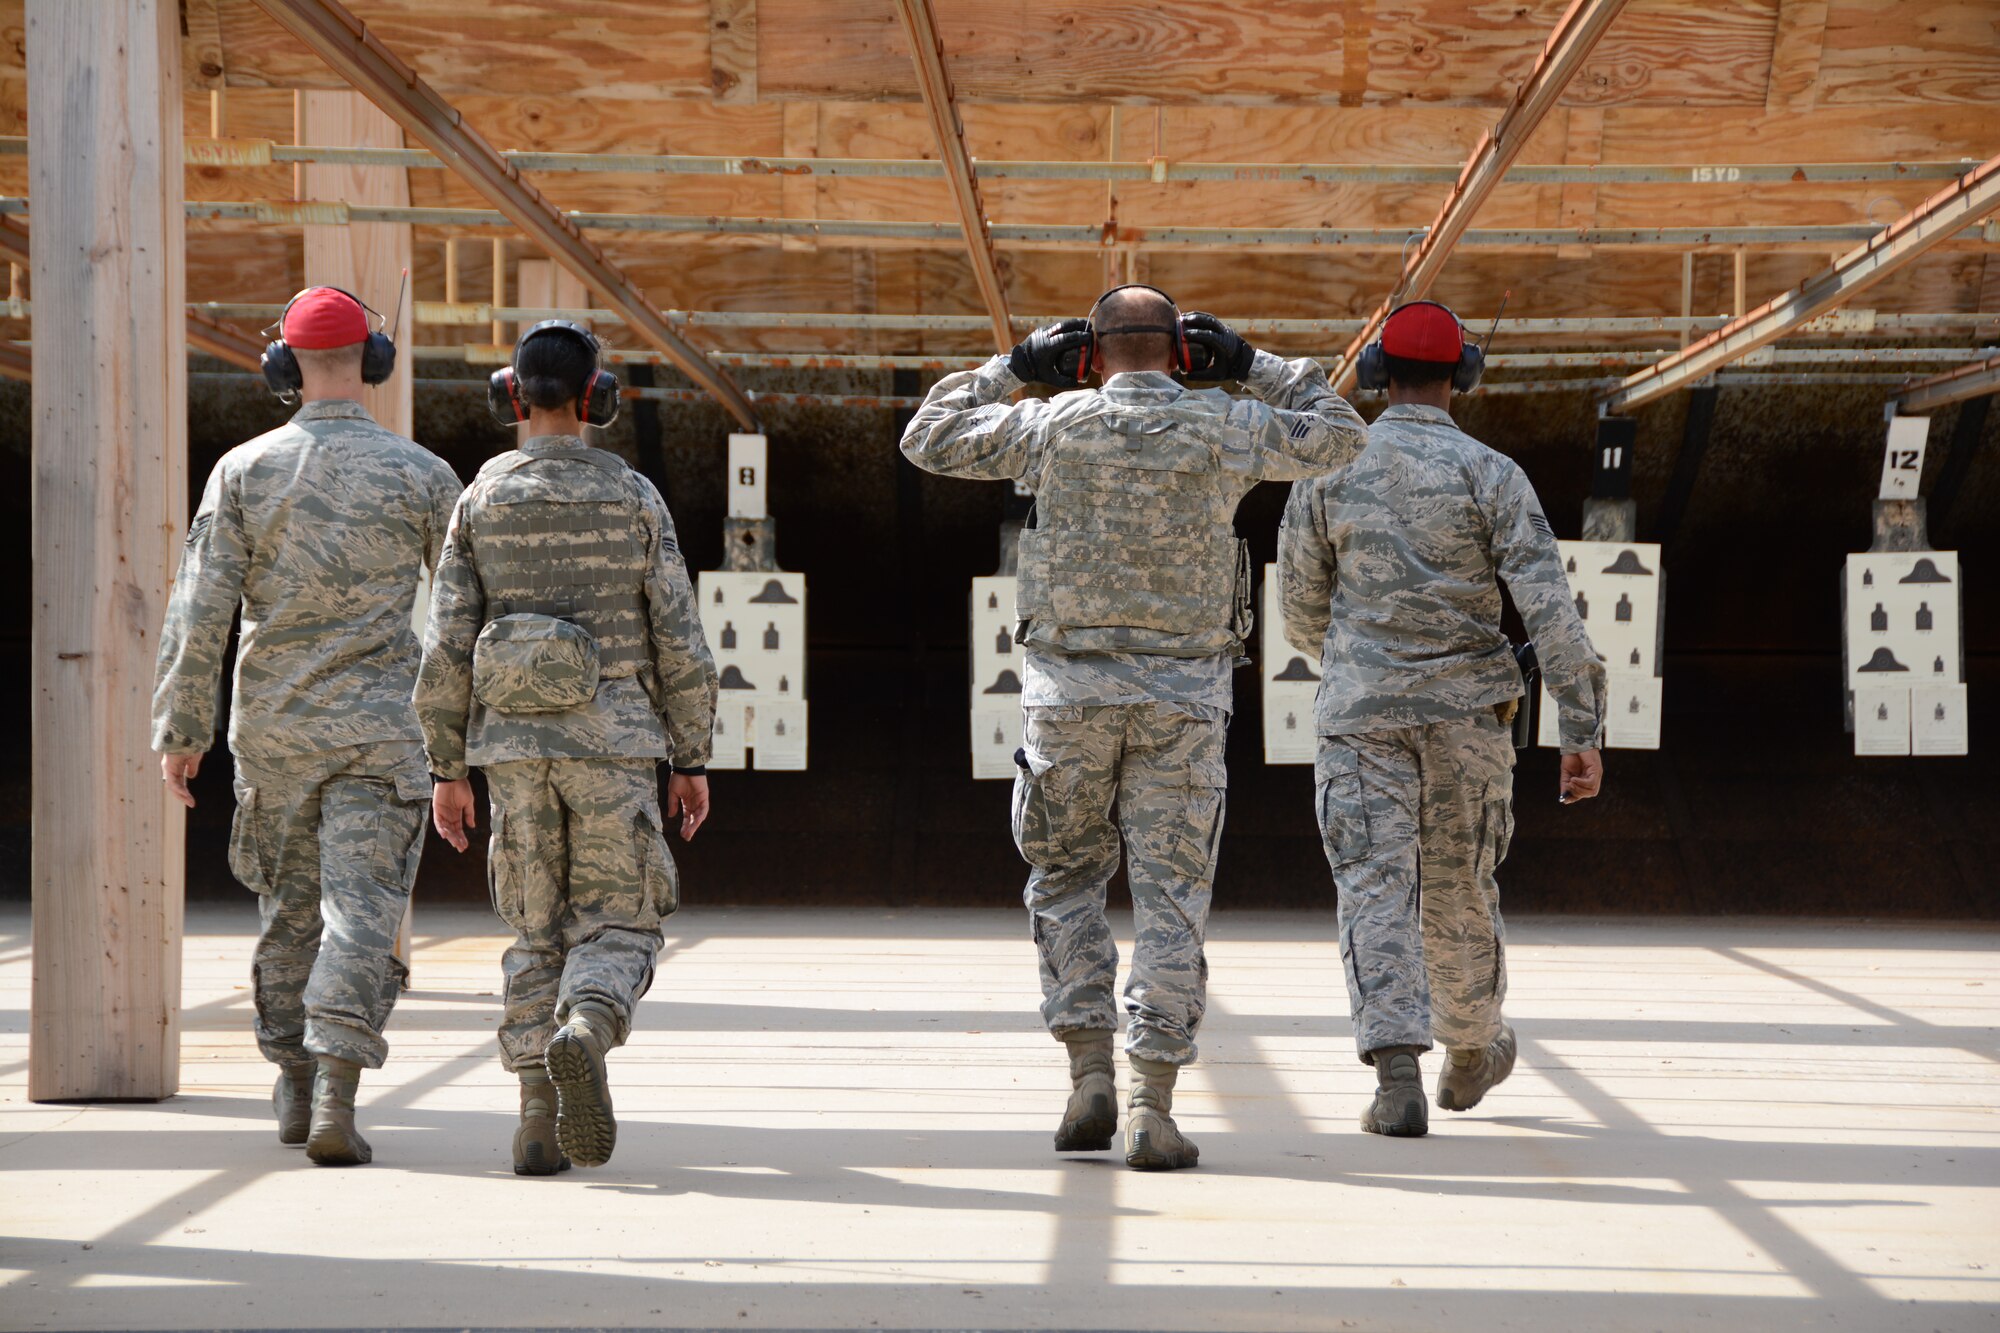 Four Combat Arms Training and Maintenance instructors from the 507th Security Forces Squadron walk out to check targets at the firing range after Airmen fire their M-4 carbines during weapons qualification Oct. 3, 2015, at Tinker Air Force Base, Okla. Reservists interested in joining the Security Forces career field are eligible to receive an enlistment bonus of up to $20,000 for committing to a six-year enlistment, and prior-service Airmen interested in retraining into the field are eligible for a bonus of up to $15,000. (U.S. Air Force photo by Tech. Sgt. Lauren Gleason)
